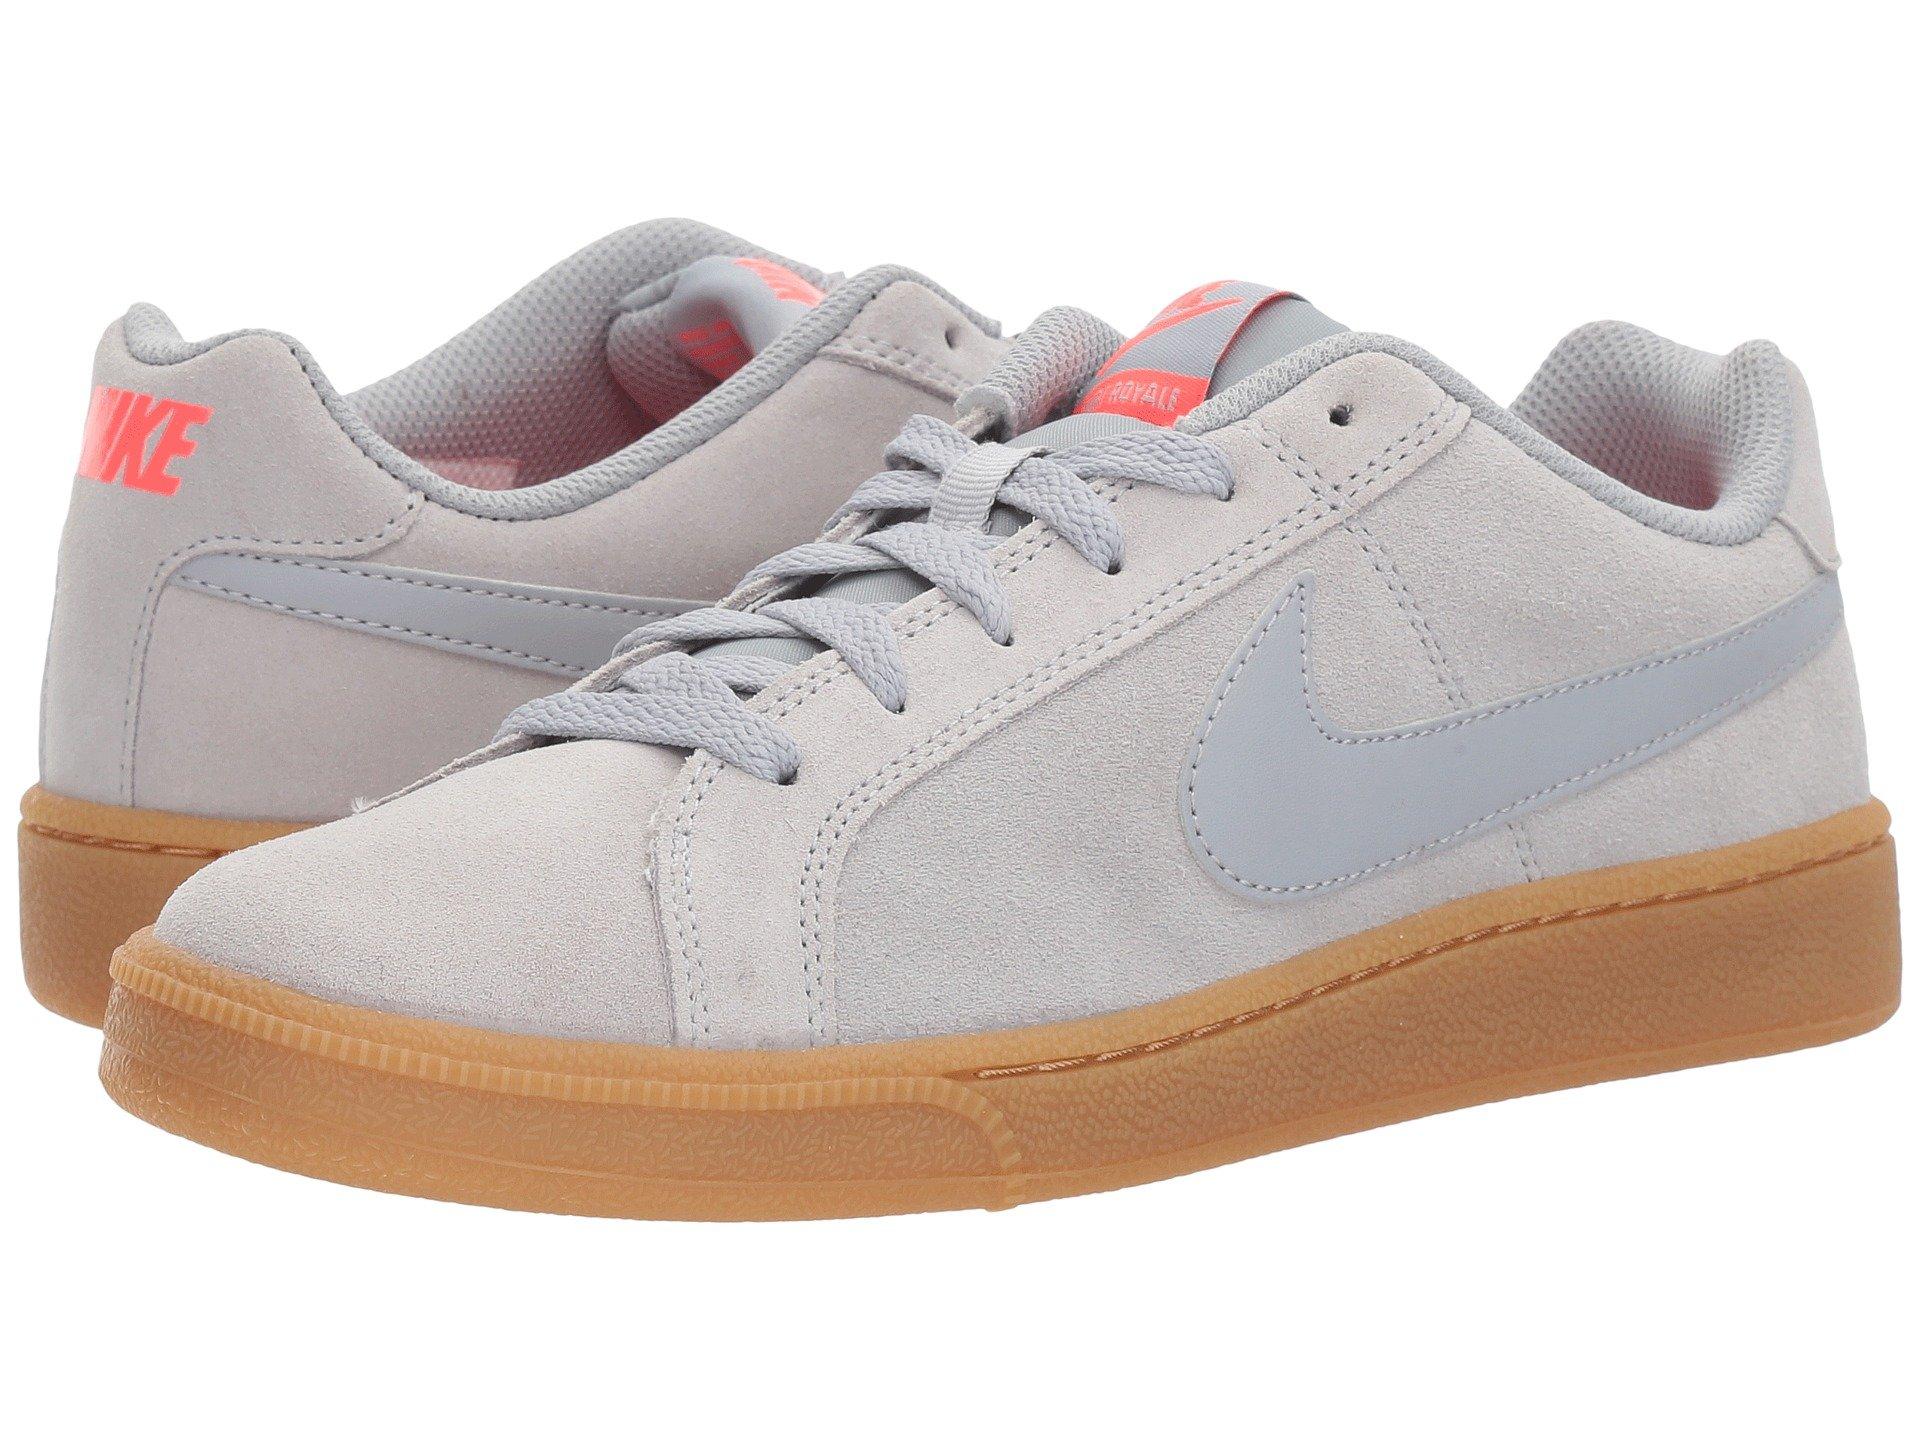 court royale suede nike